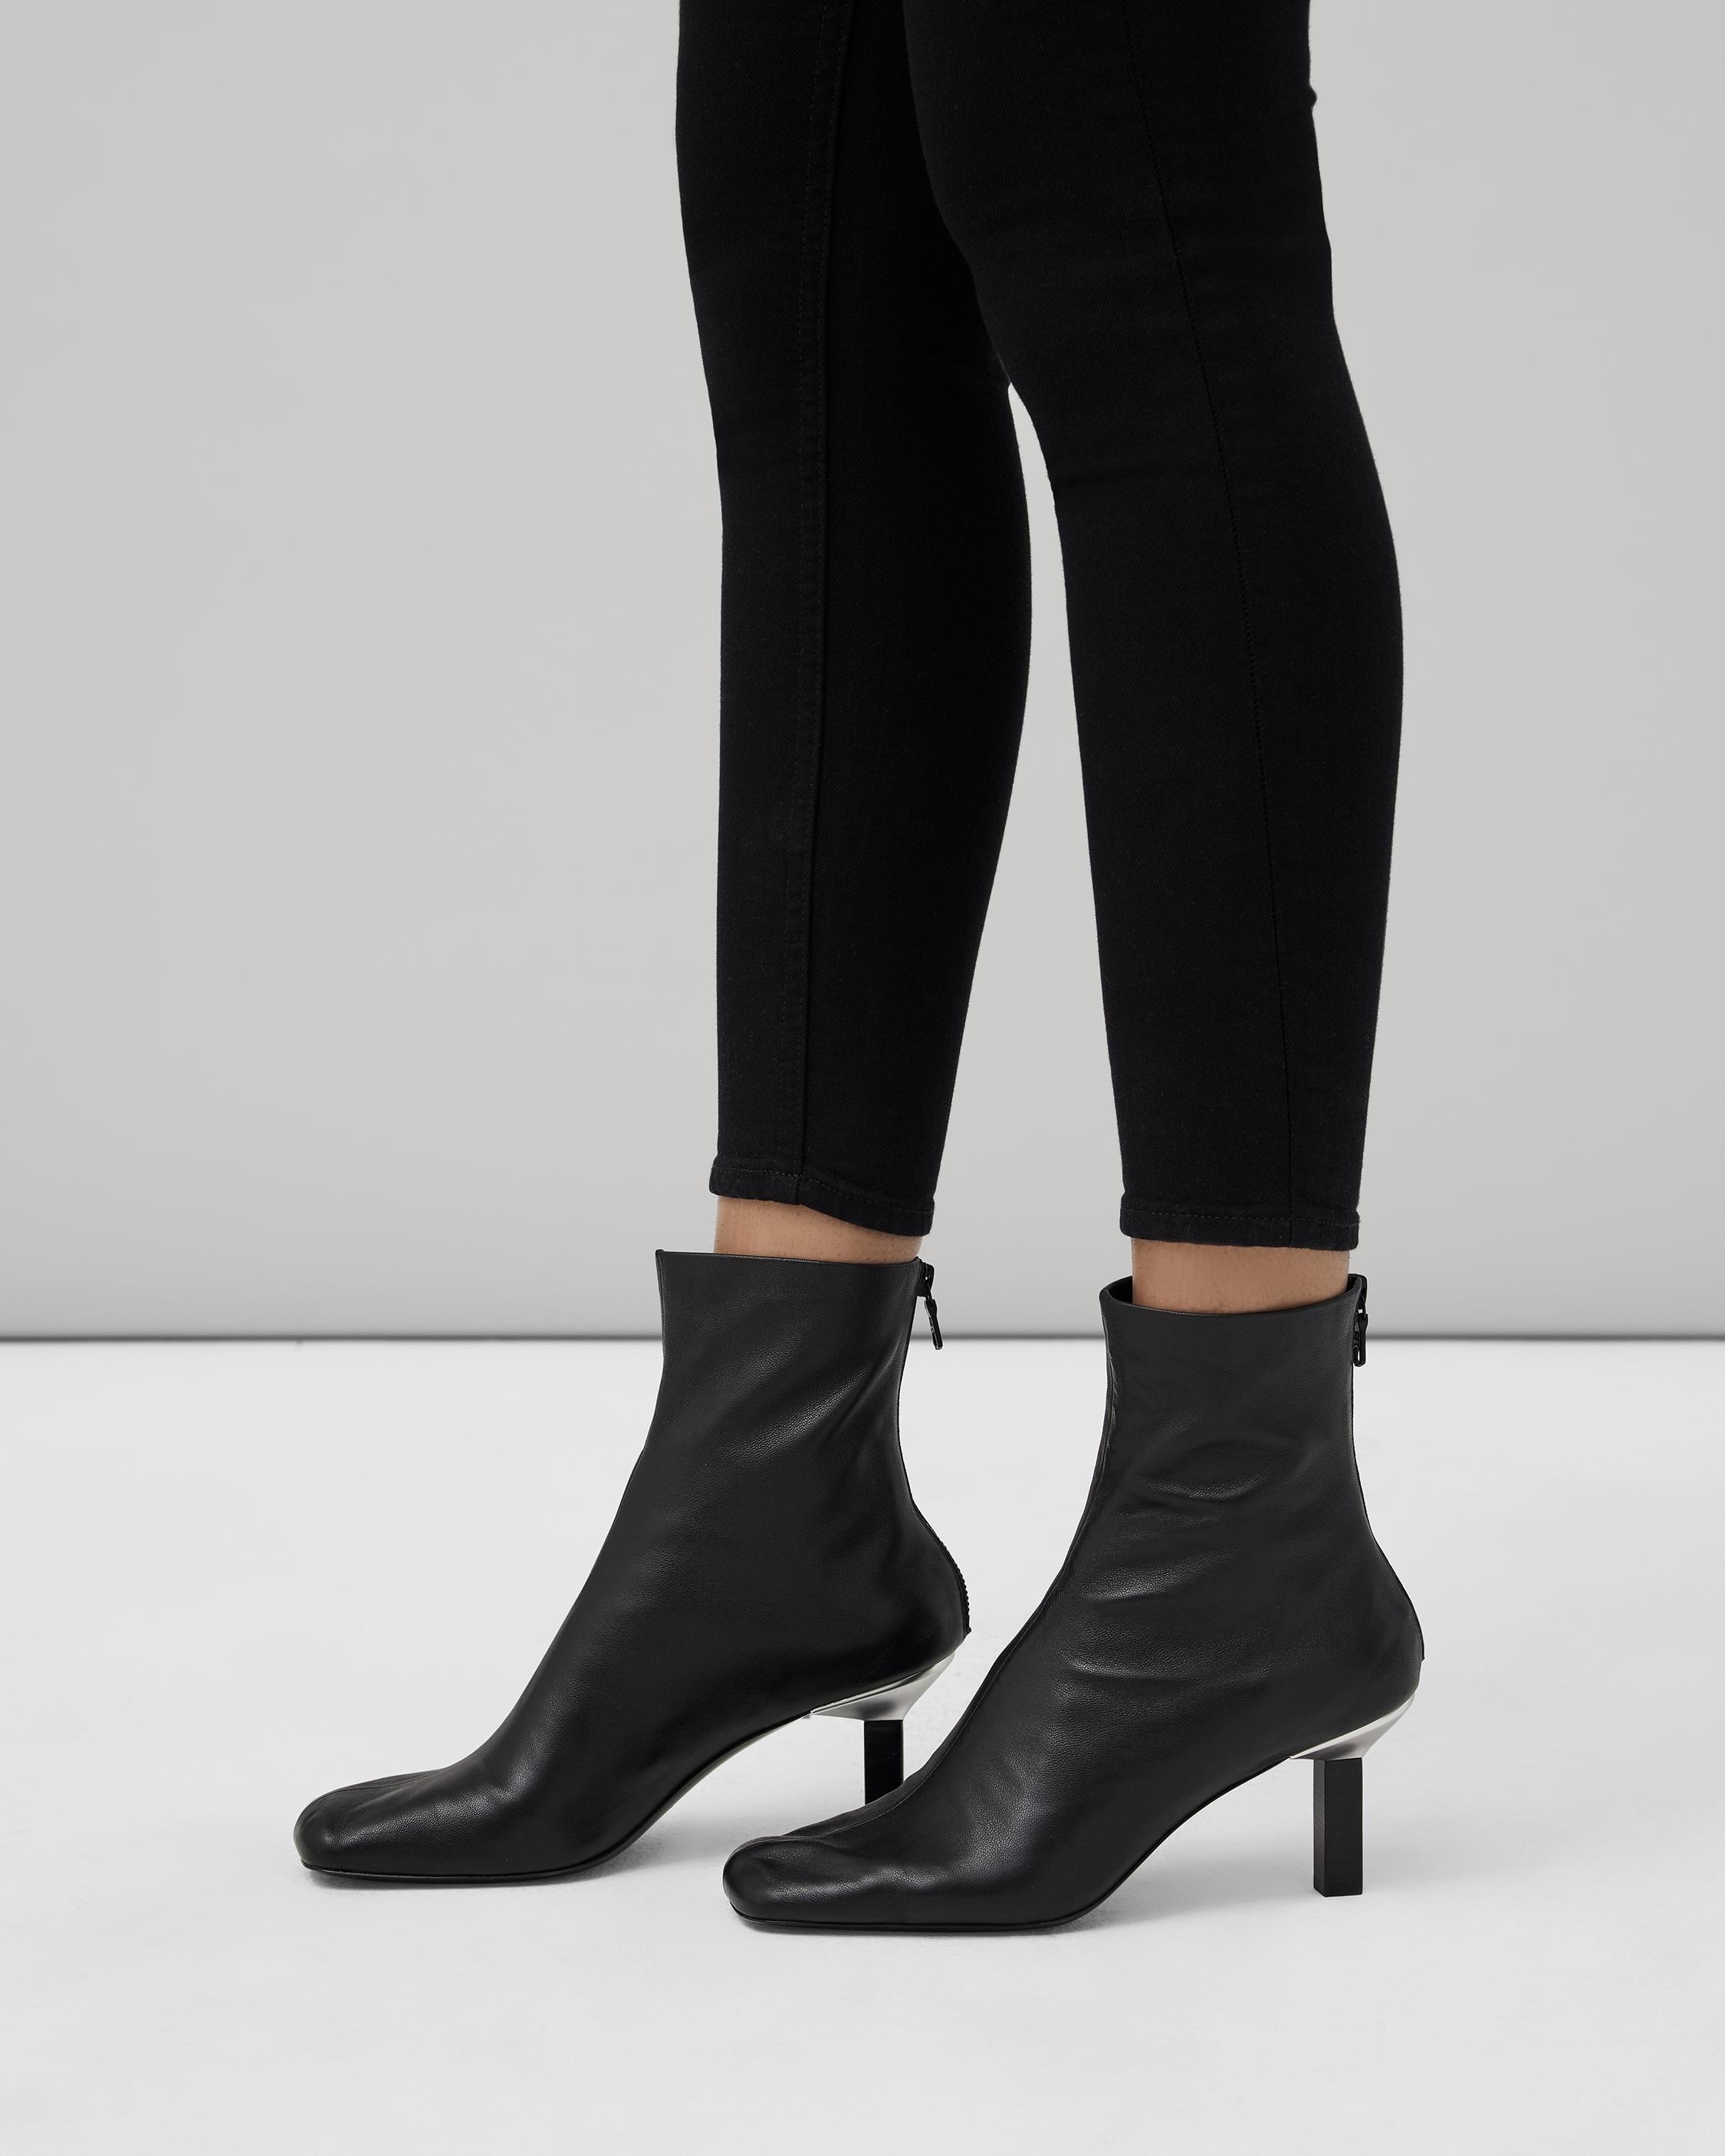 Joey Boot - Leather
Heeled Ankle Boot - 2